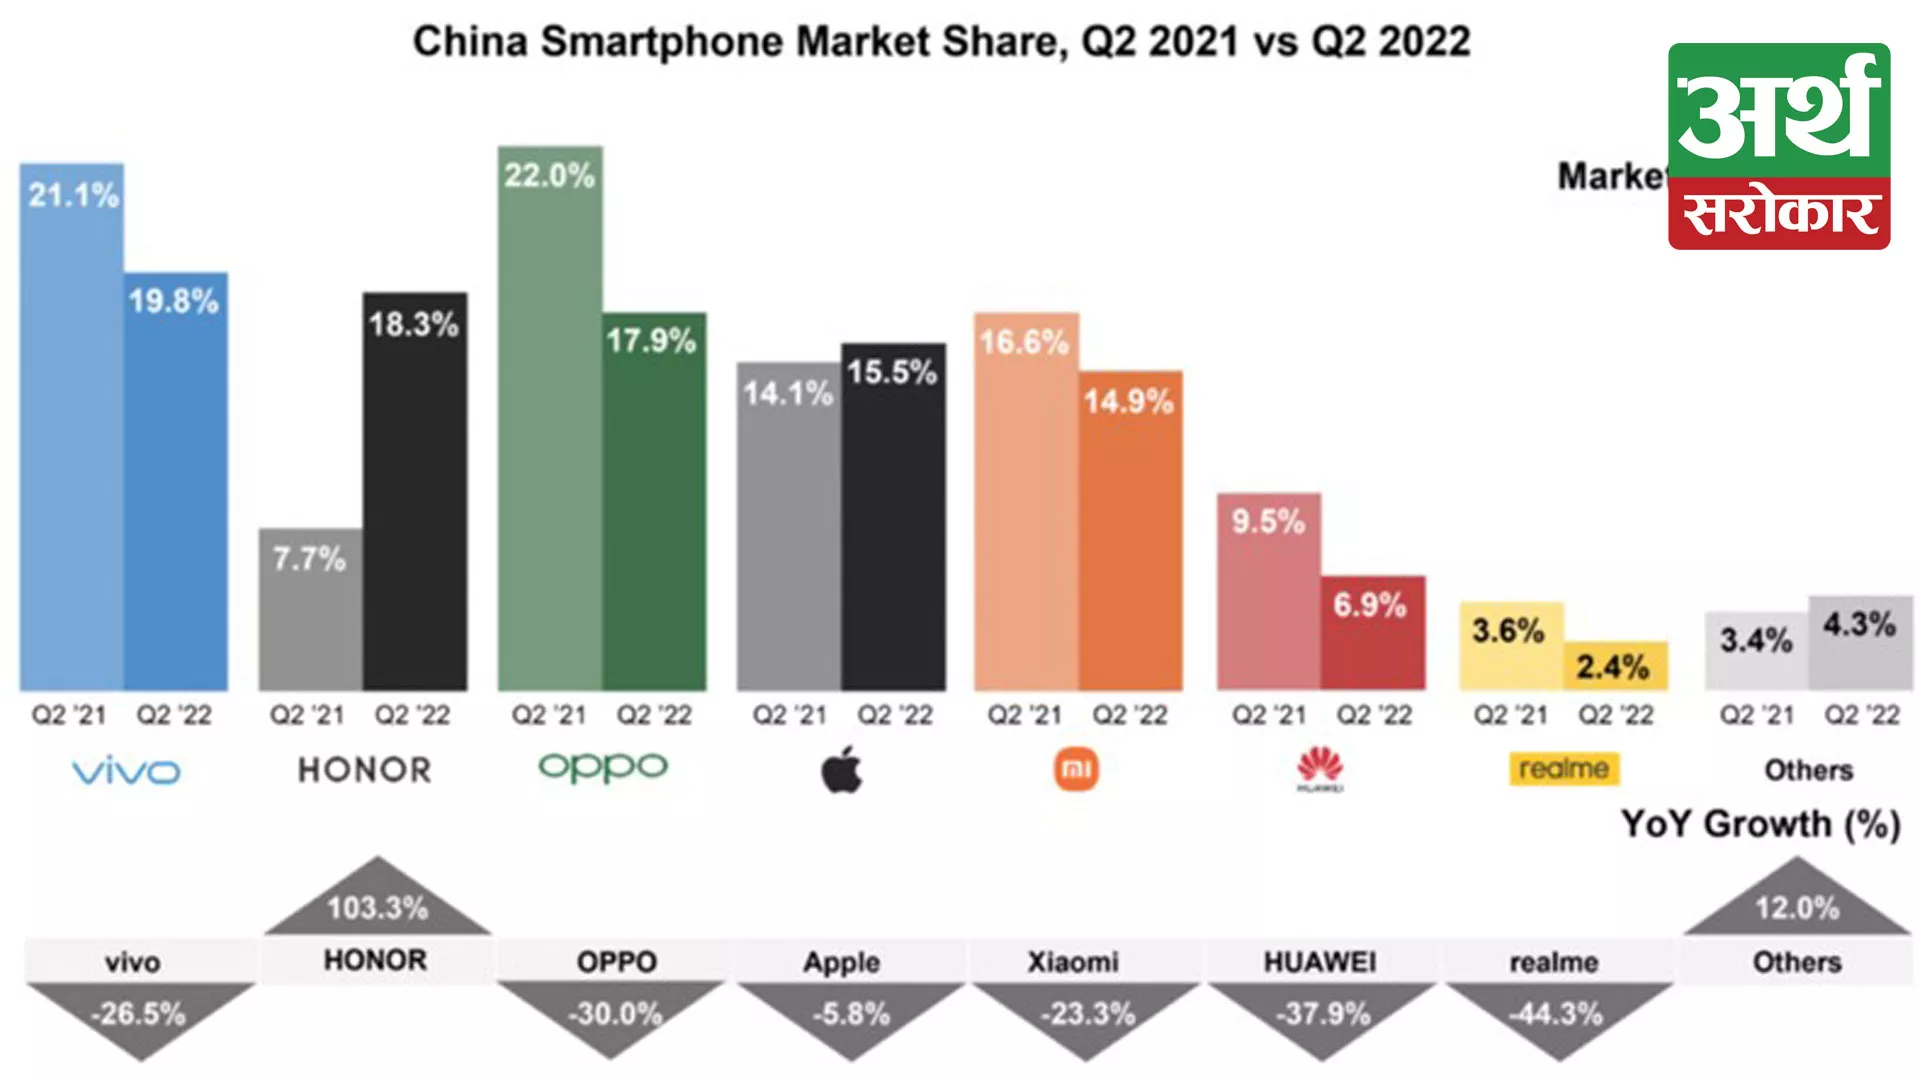 vivo Topped China’s Smartphone Market in Q2 2022, According to a Counterpoint Report